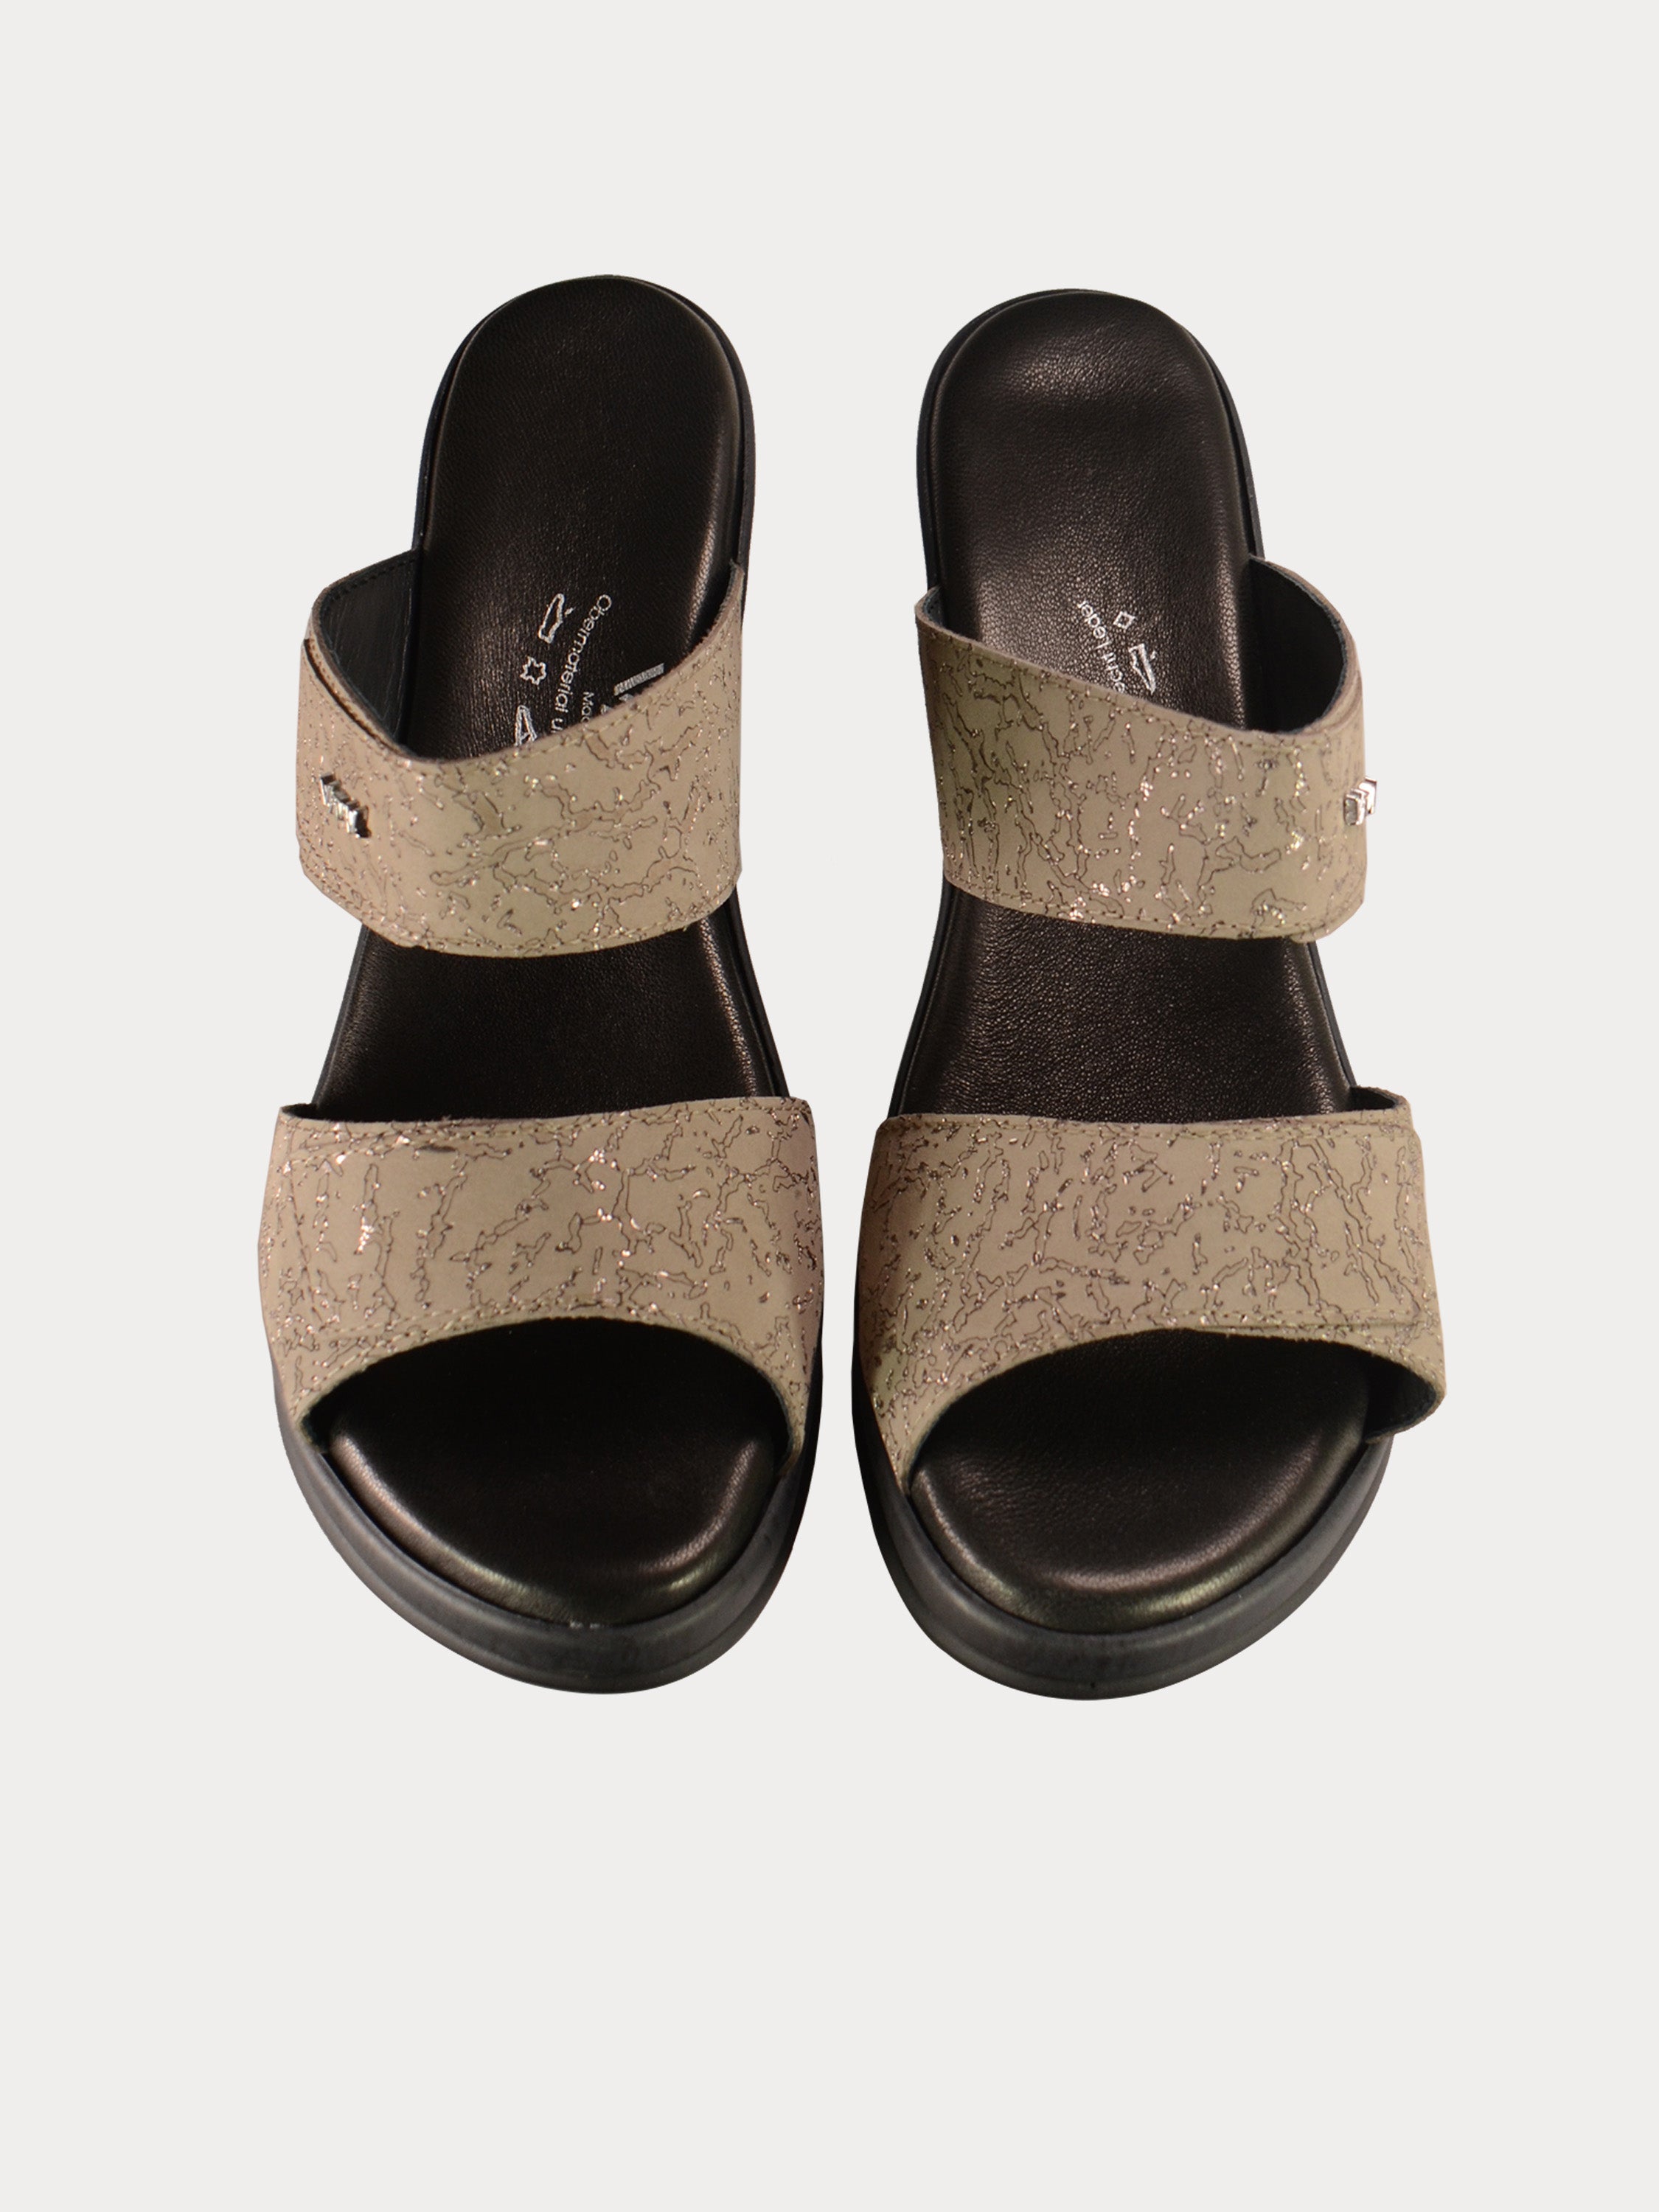 Vital Women's Leather Wedges #color_Beige